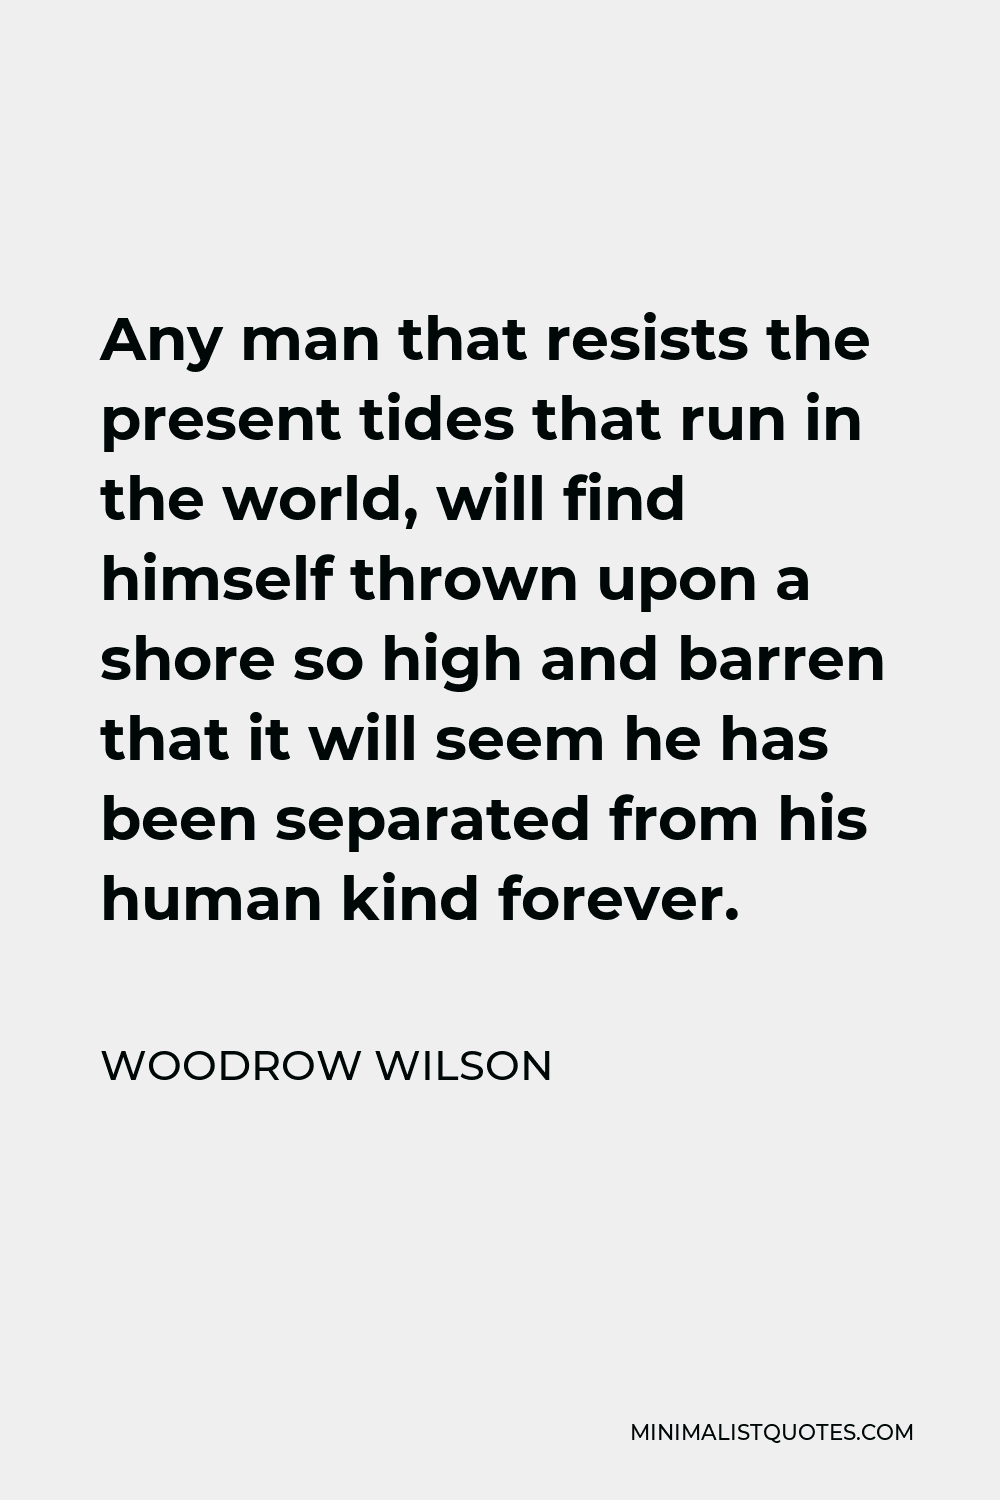 Woodrow Wilson Quote - Any man that resists the present tides that run in the world, will find himself thrown upon a shore so high and barren that it will seem he has been separated from his human kind forever.